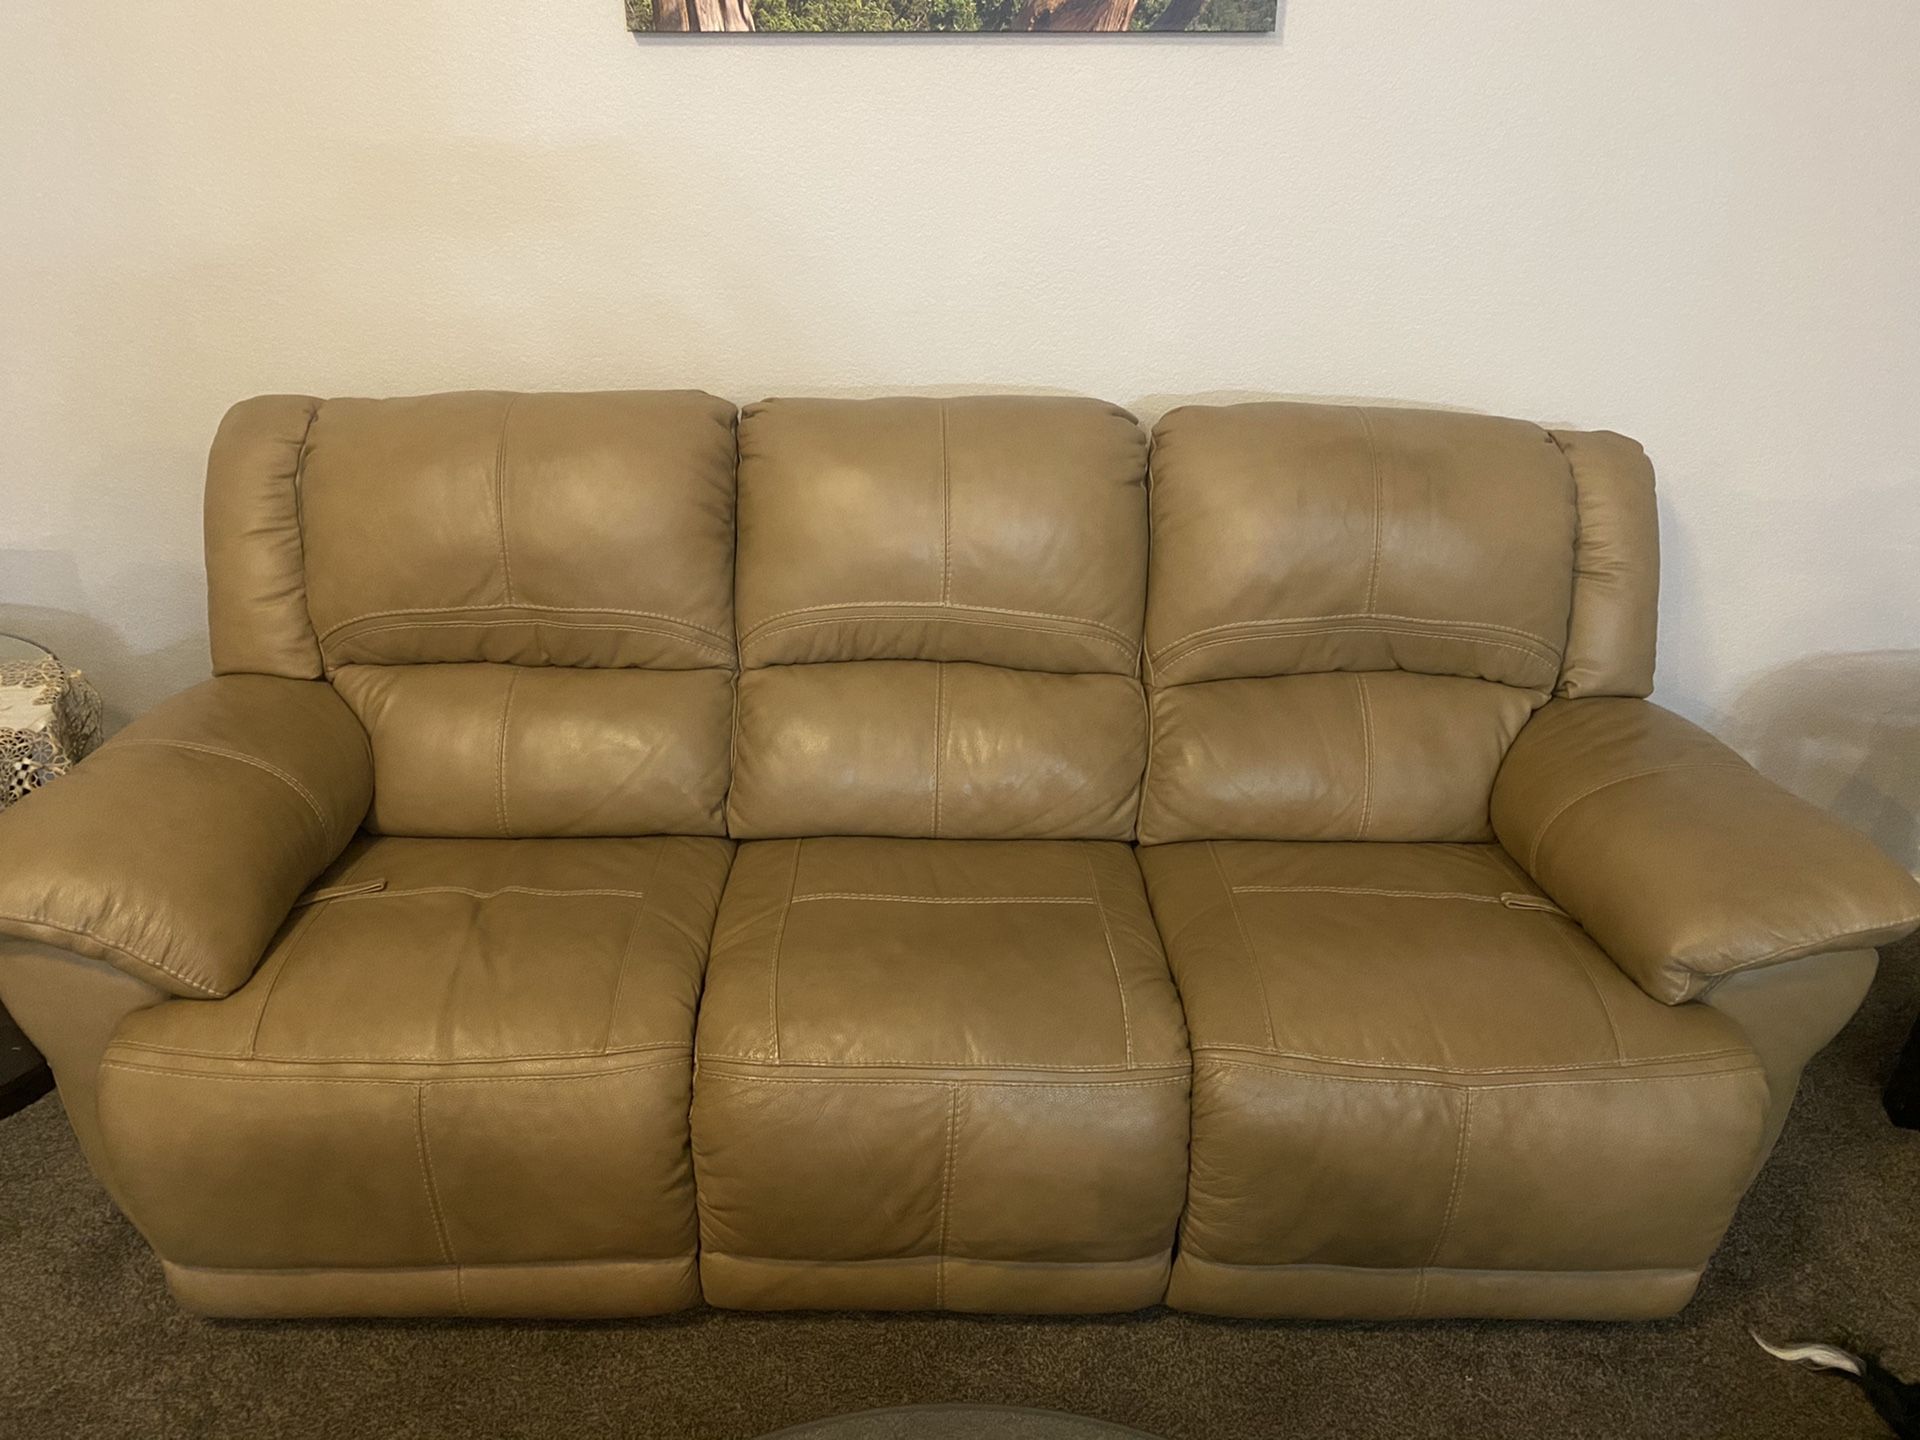 Leather couch & recliner